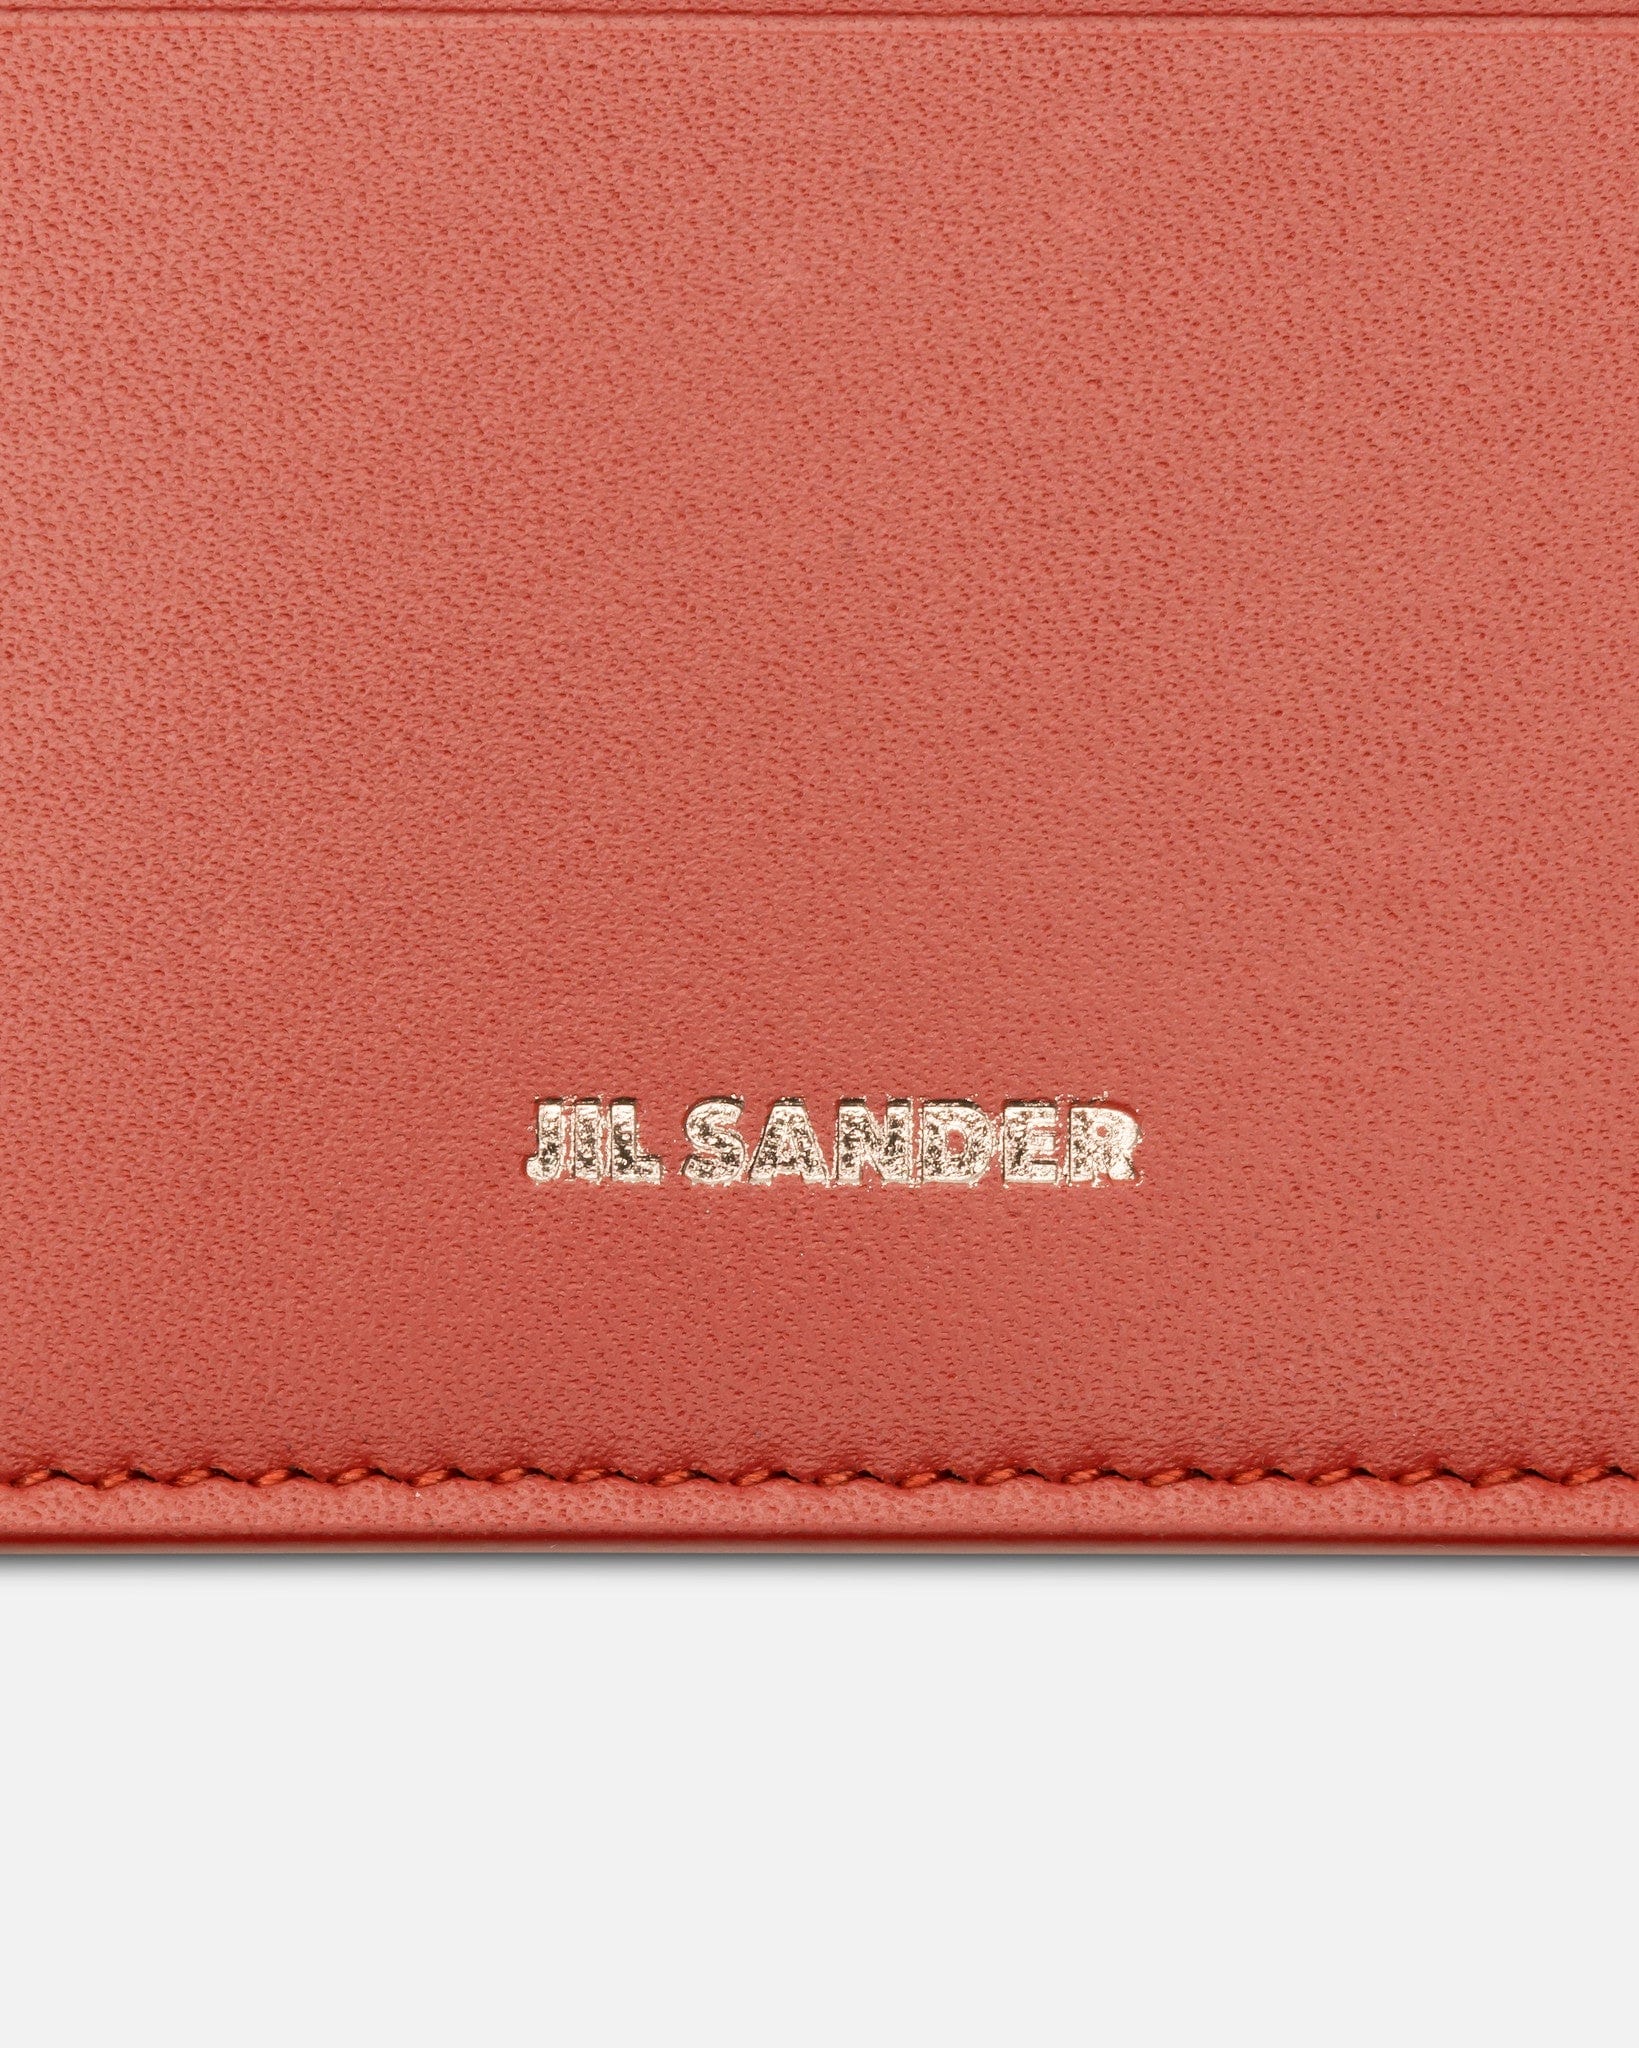 Jil Sander Leather Goods O/S Calf Leather with Nappa Lining Credit Card Holder in Brick